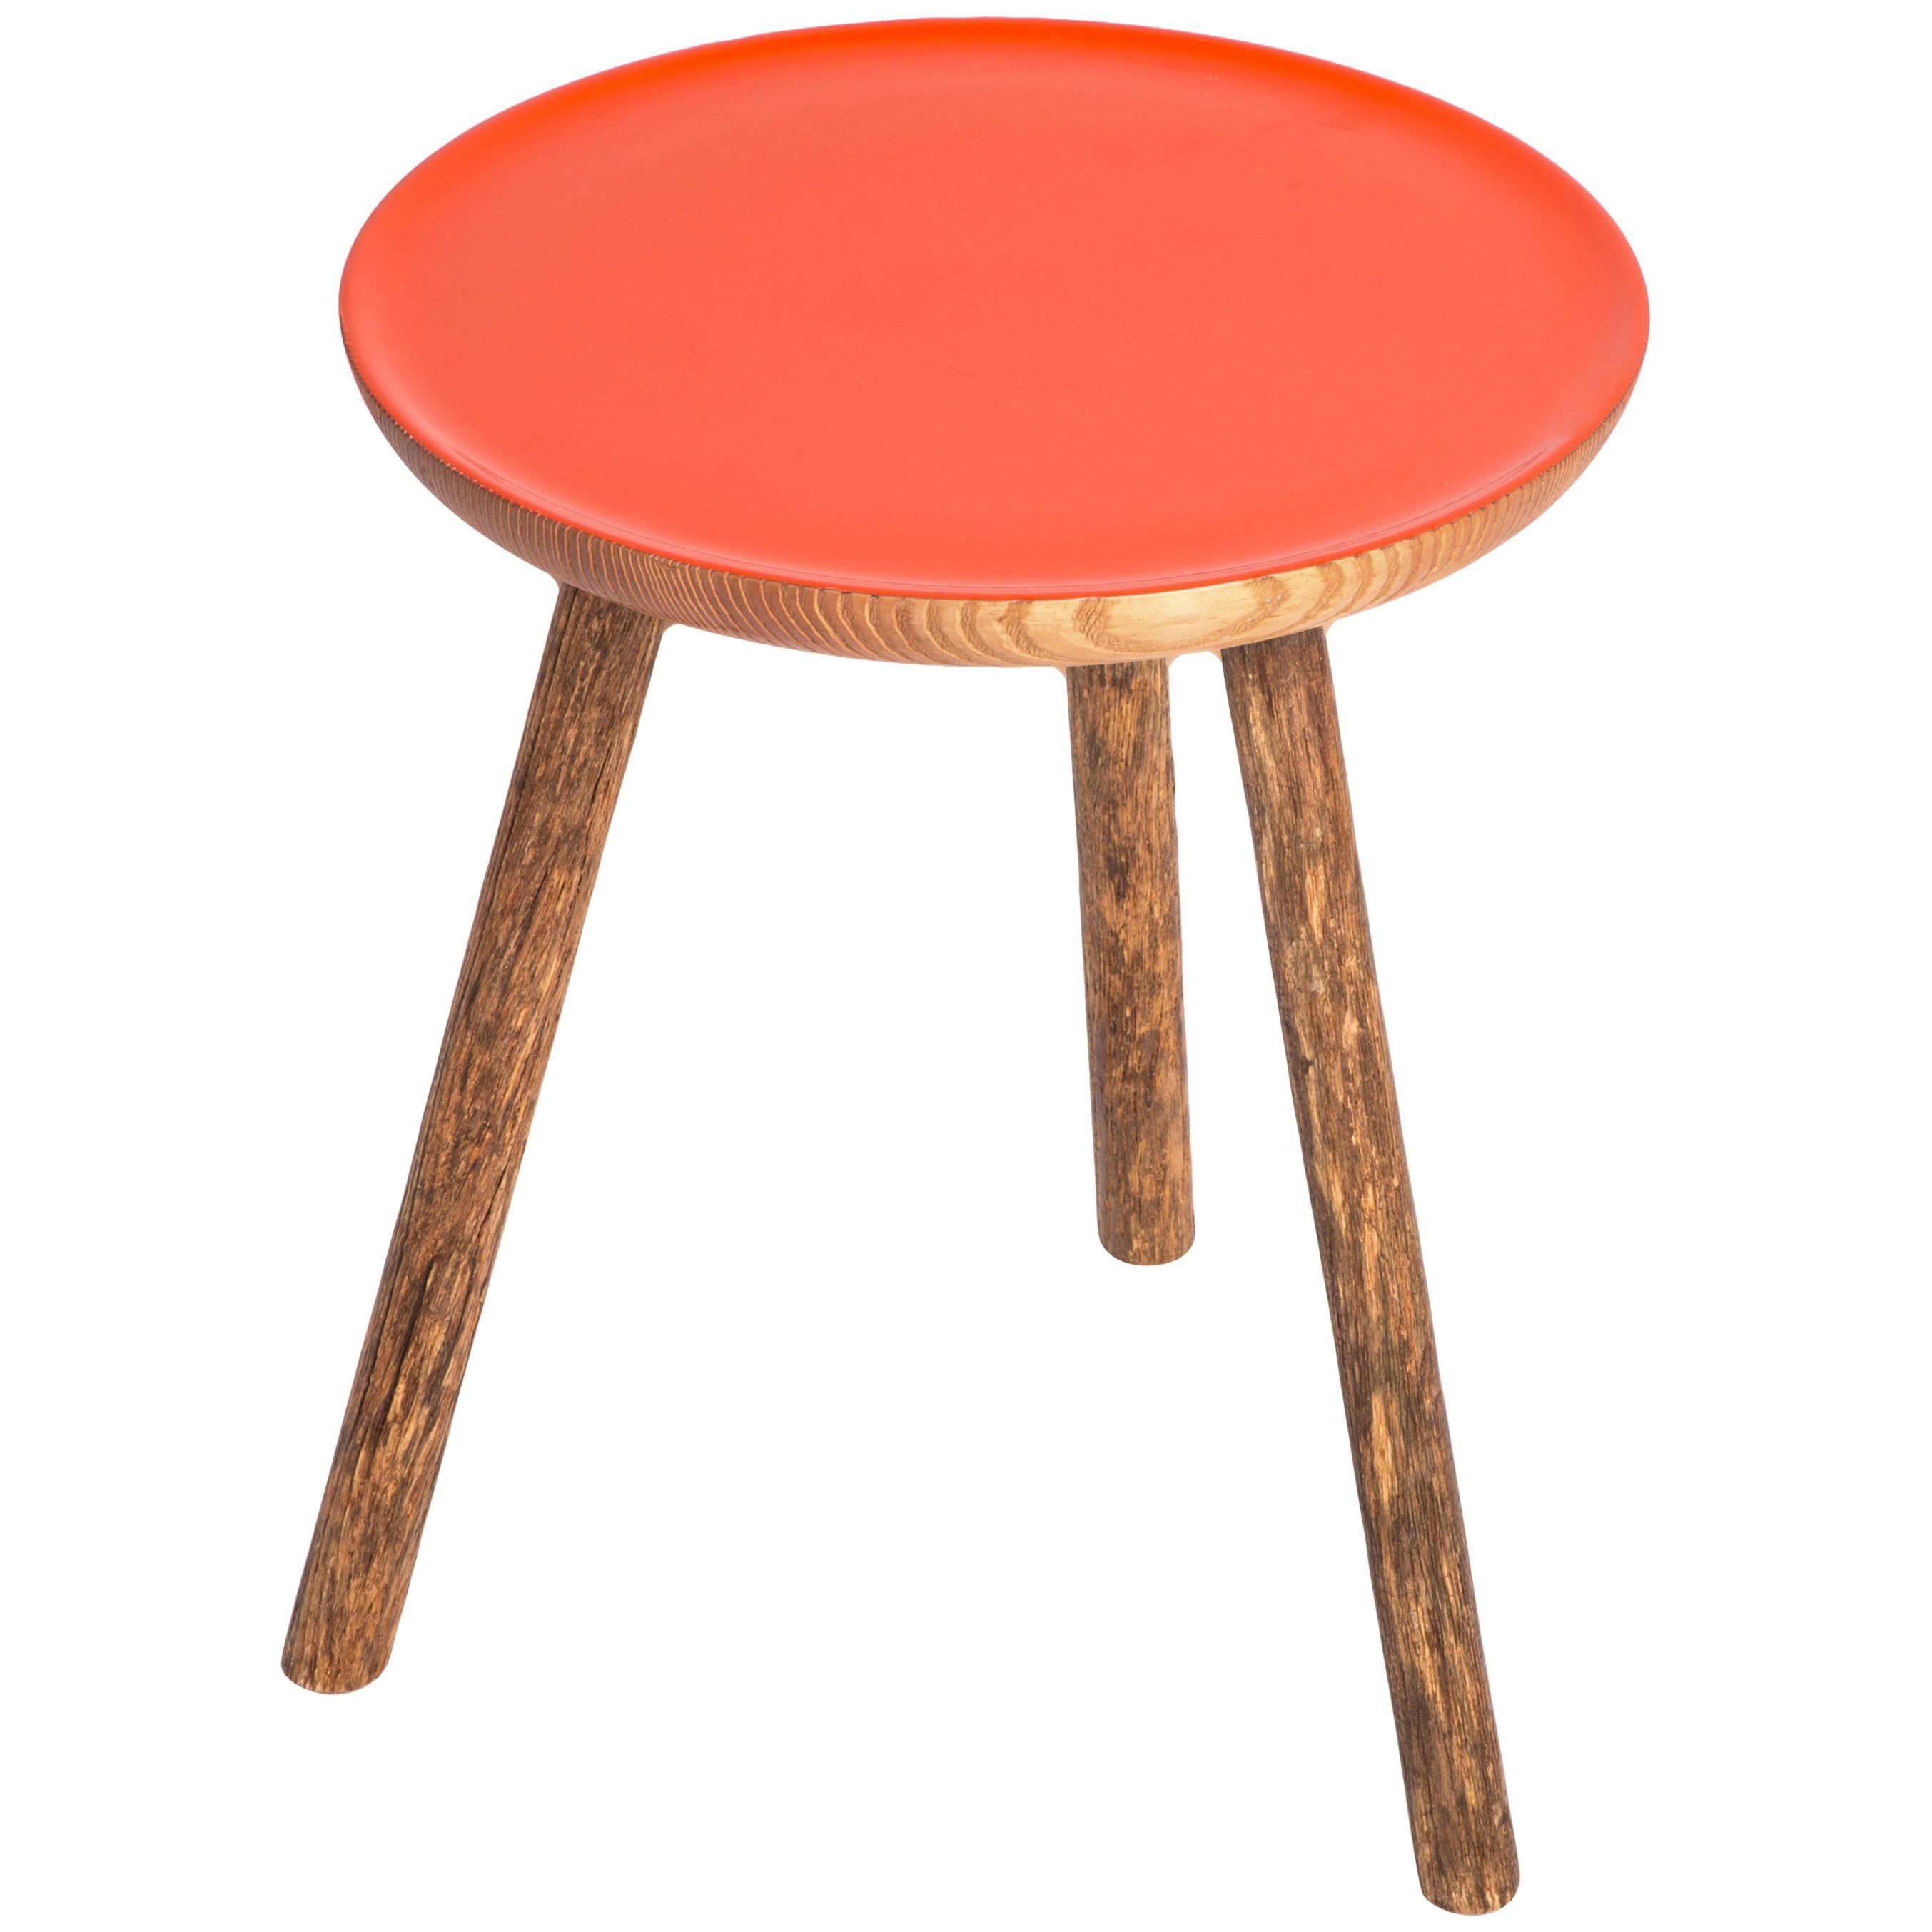 This staked wood side table with orange glossy top is a new edition from Erik Gustafson. The top color is customizable upon request. 

Gustafson’s inspiration stems from a love of the history of art, architecture and design. Gustafson pieces are